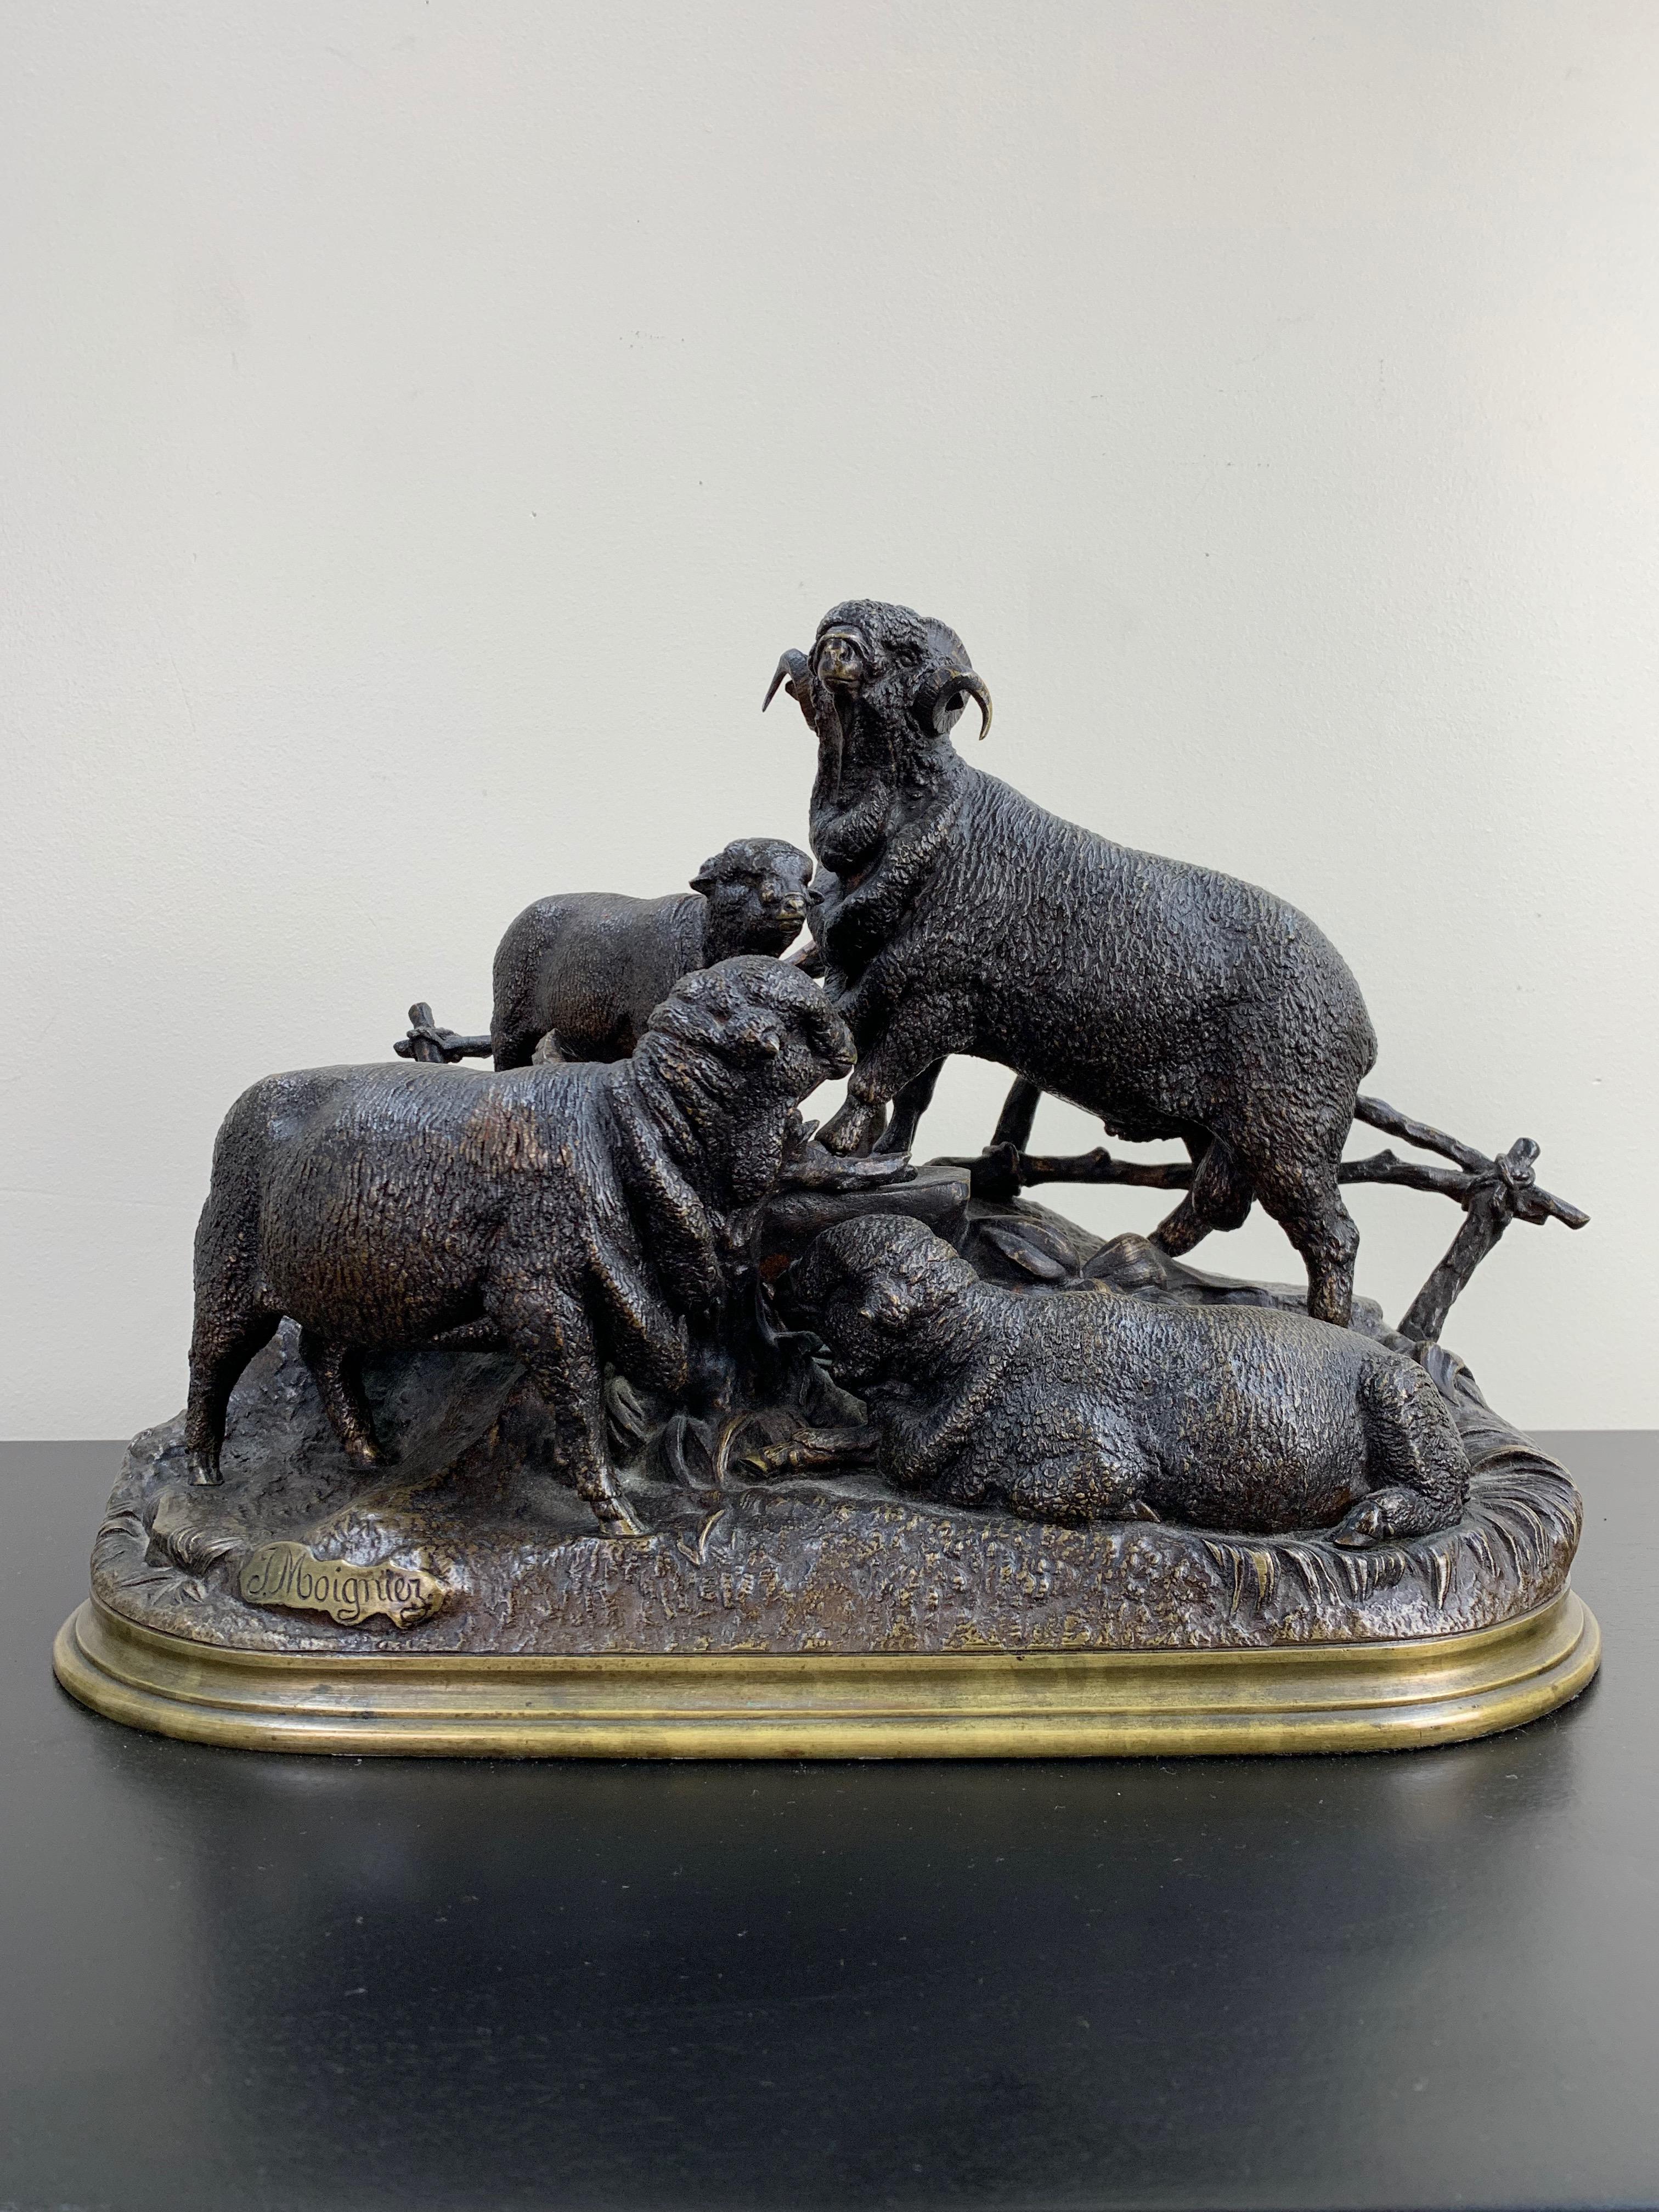 Bronze grouping of sheep with a nuanced brown patination. Moigniez' intricate work on the surface of the piece created a true-to-life rendering of the sheep's fleece. The group is set on an oval, brass base. Signed on the base: J. Moigniez.